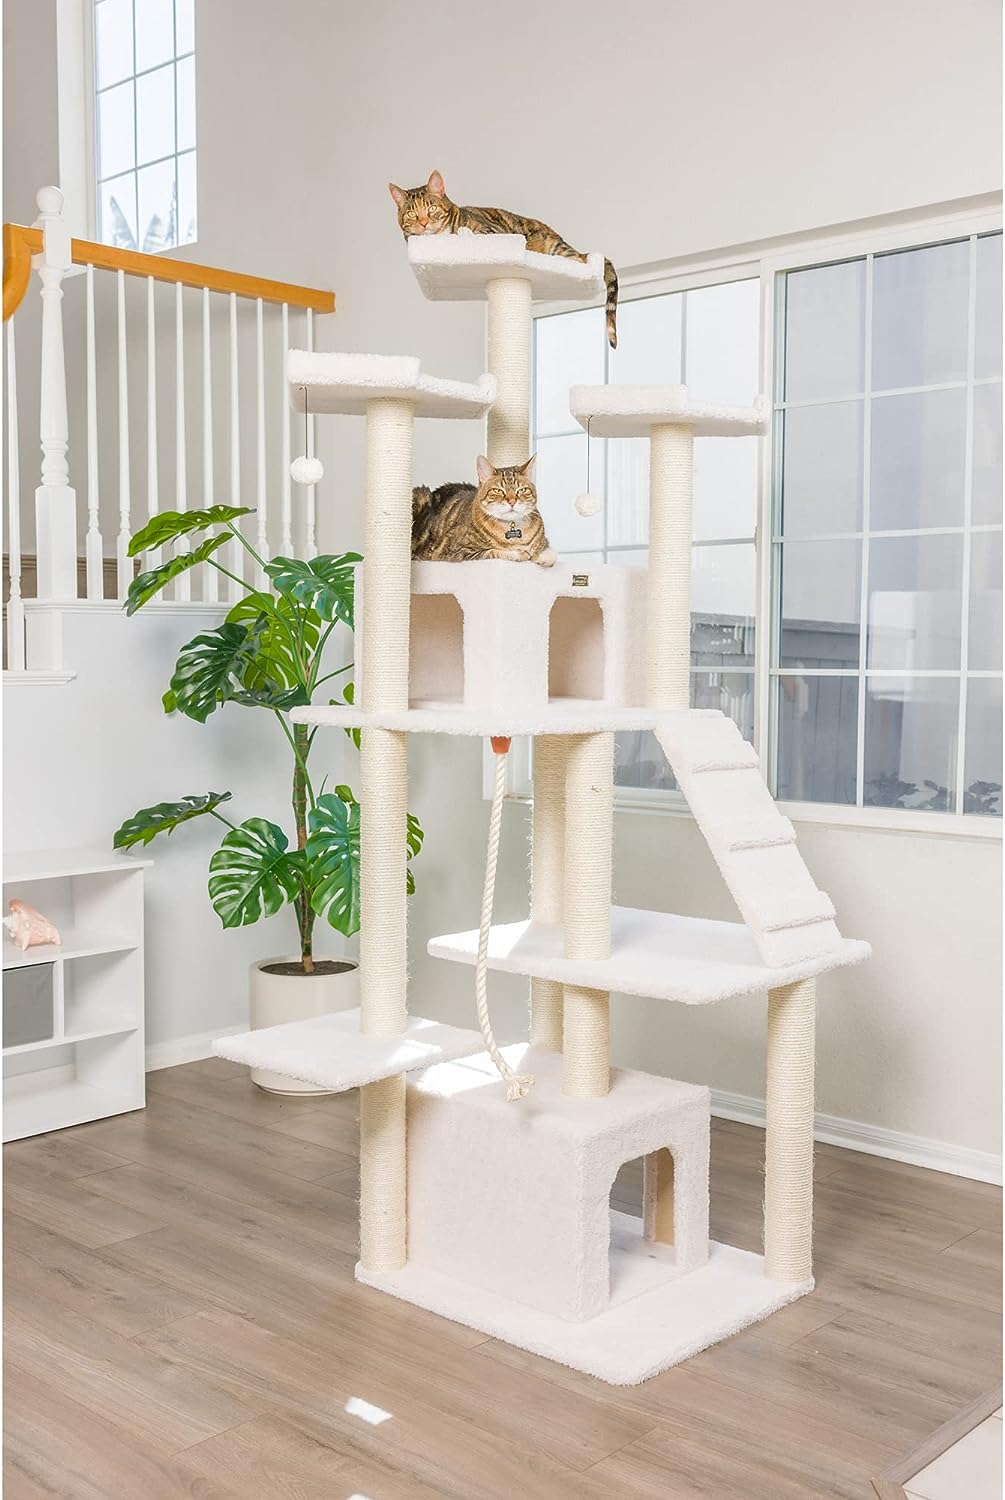 Armarkat B8201 Classic Cat Tree in Ivory, Jackson Galaxy Approved, Real Wood Multi Levels Cat Jungle Furniture